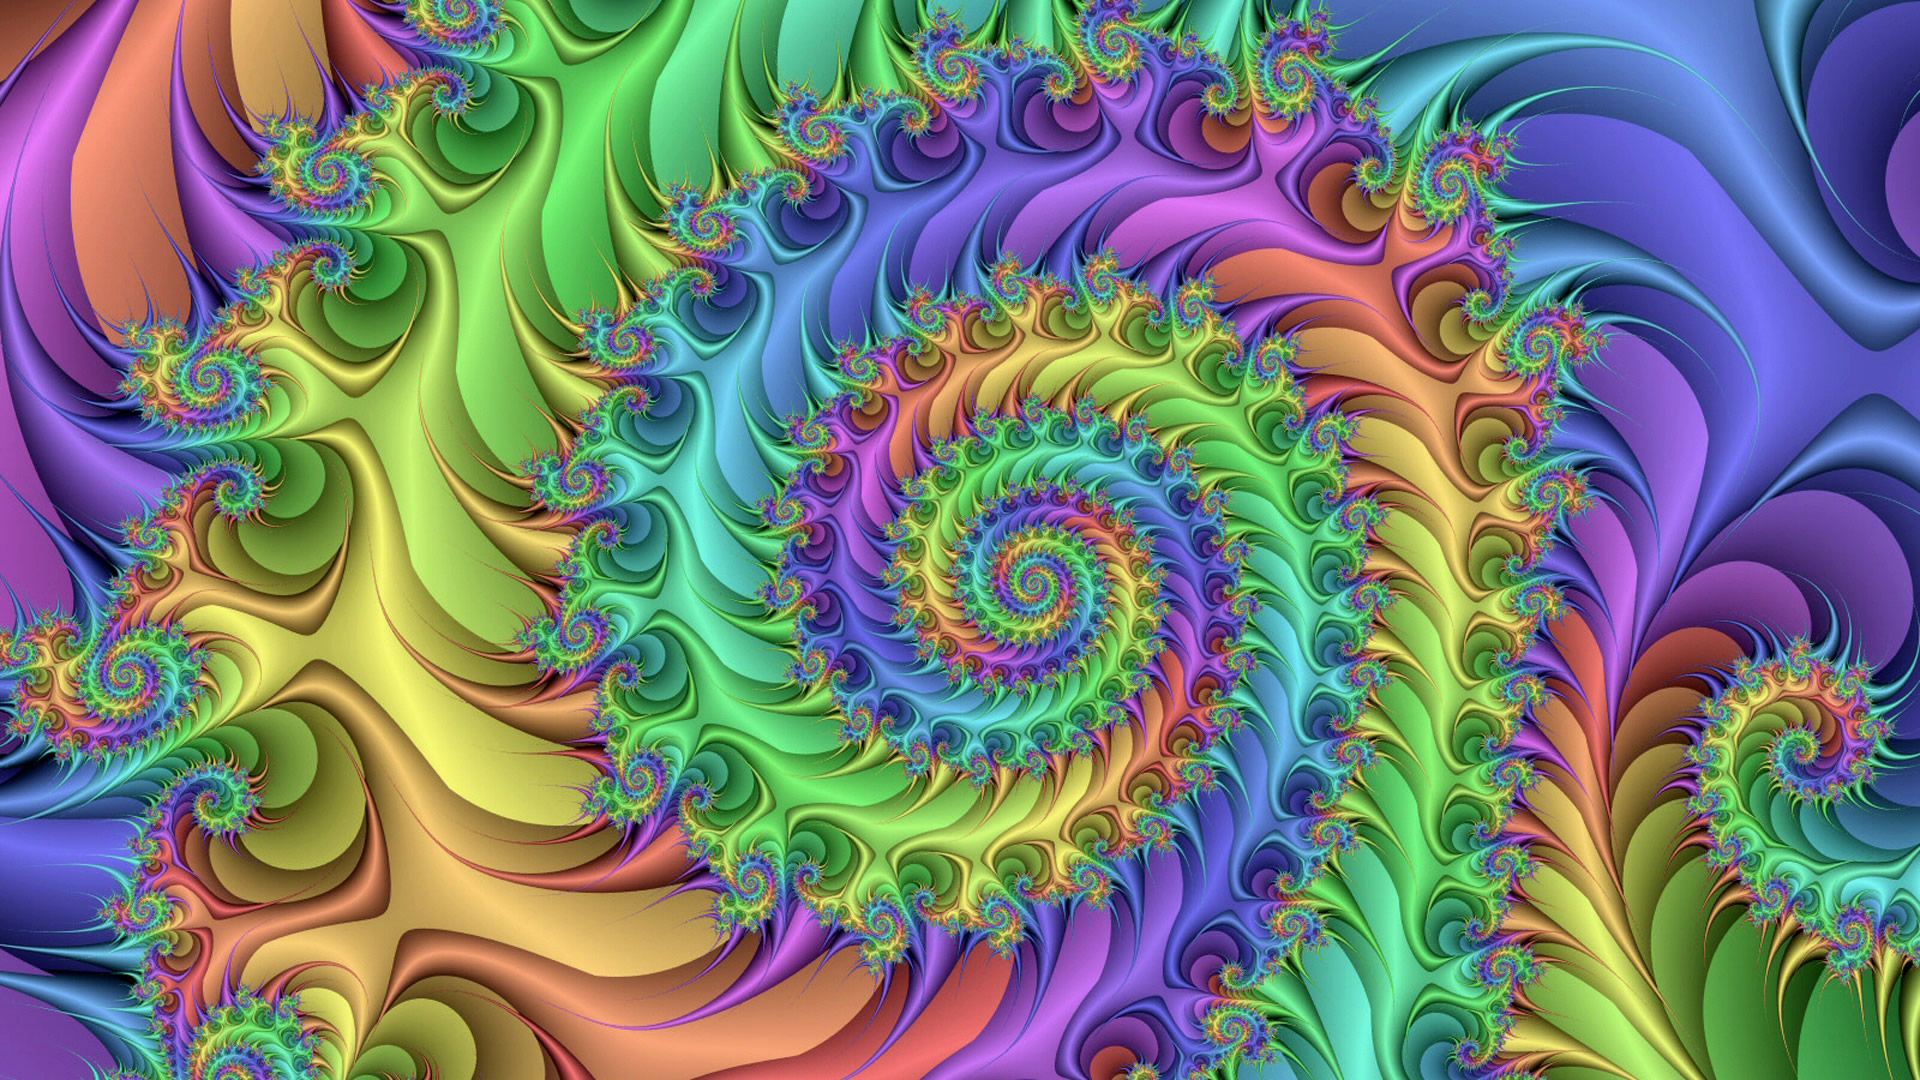 High Resolution Trippy Wallpapers Full Size - SiWallpaperHD 17189